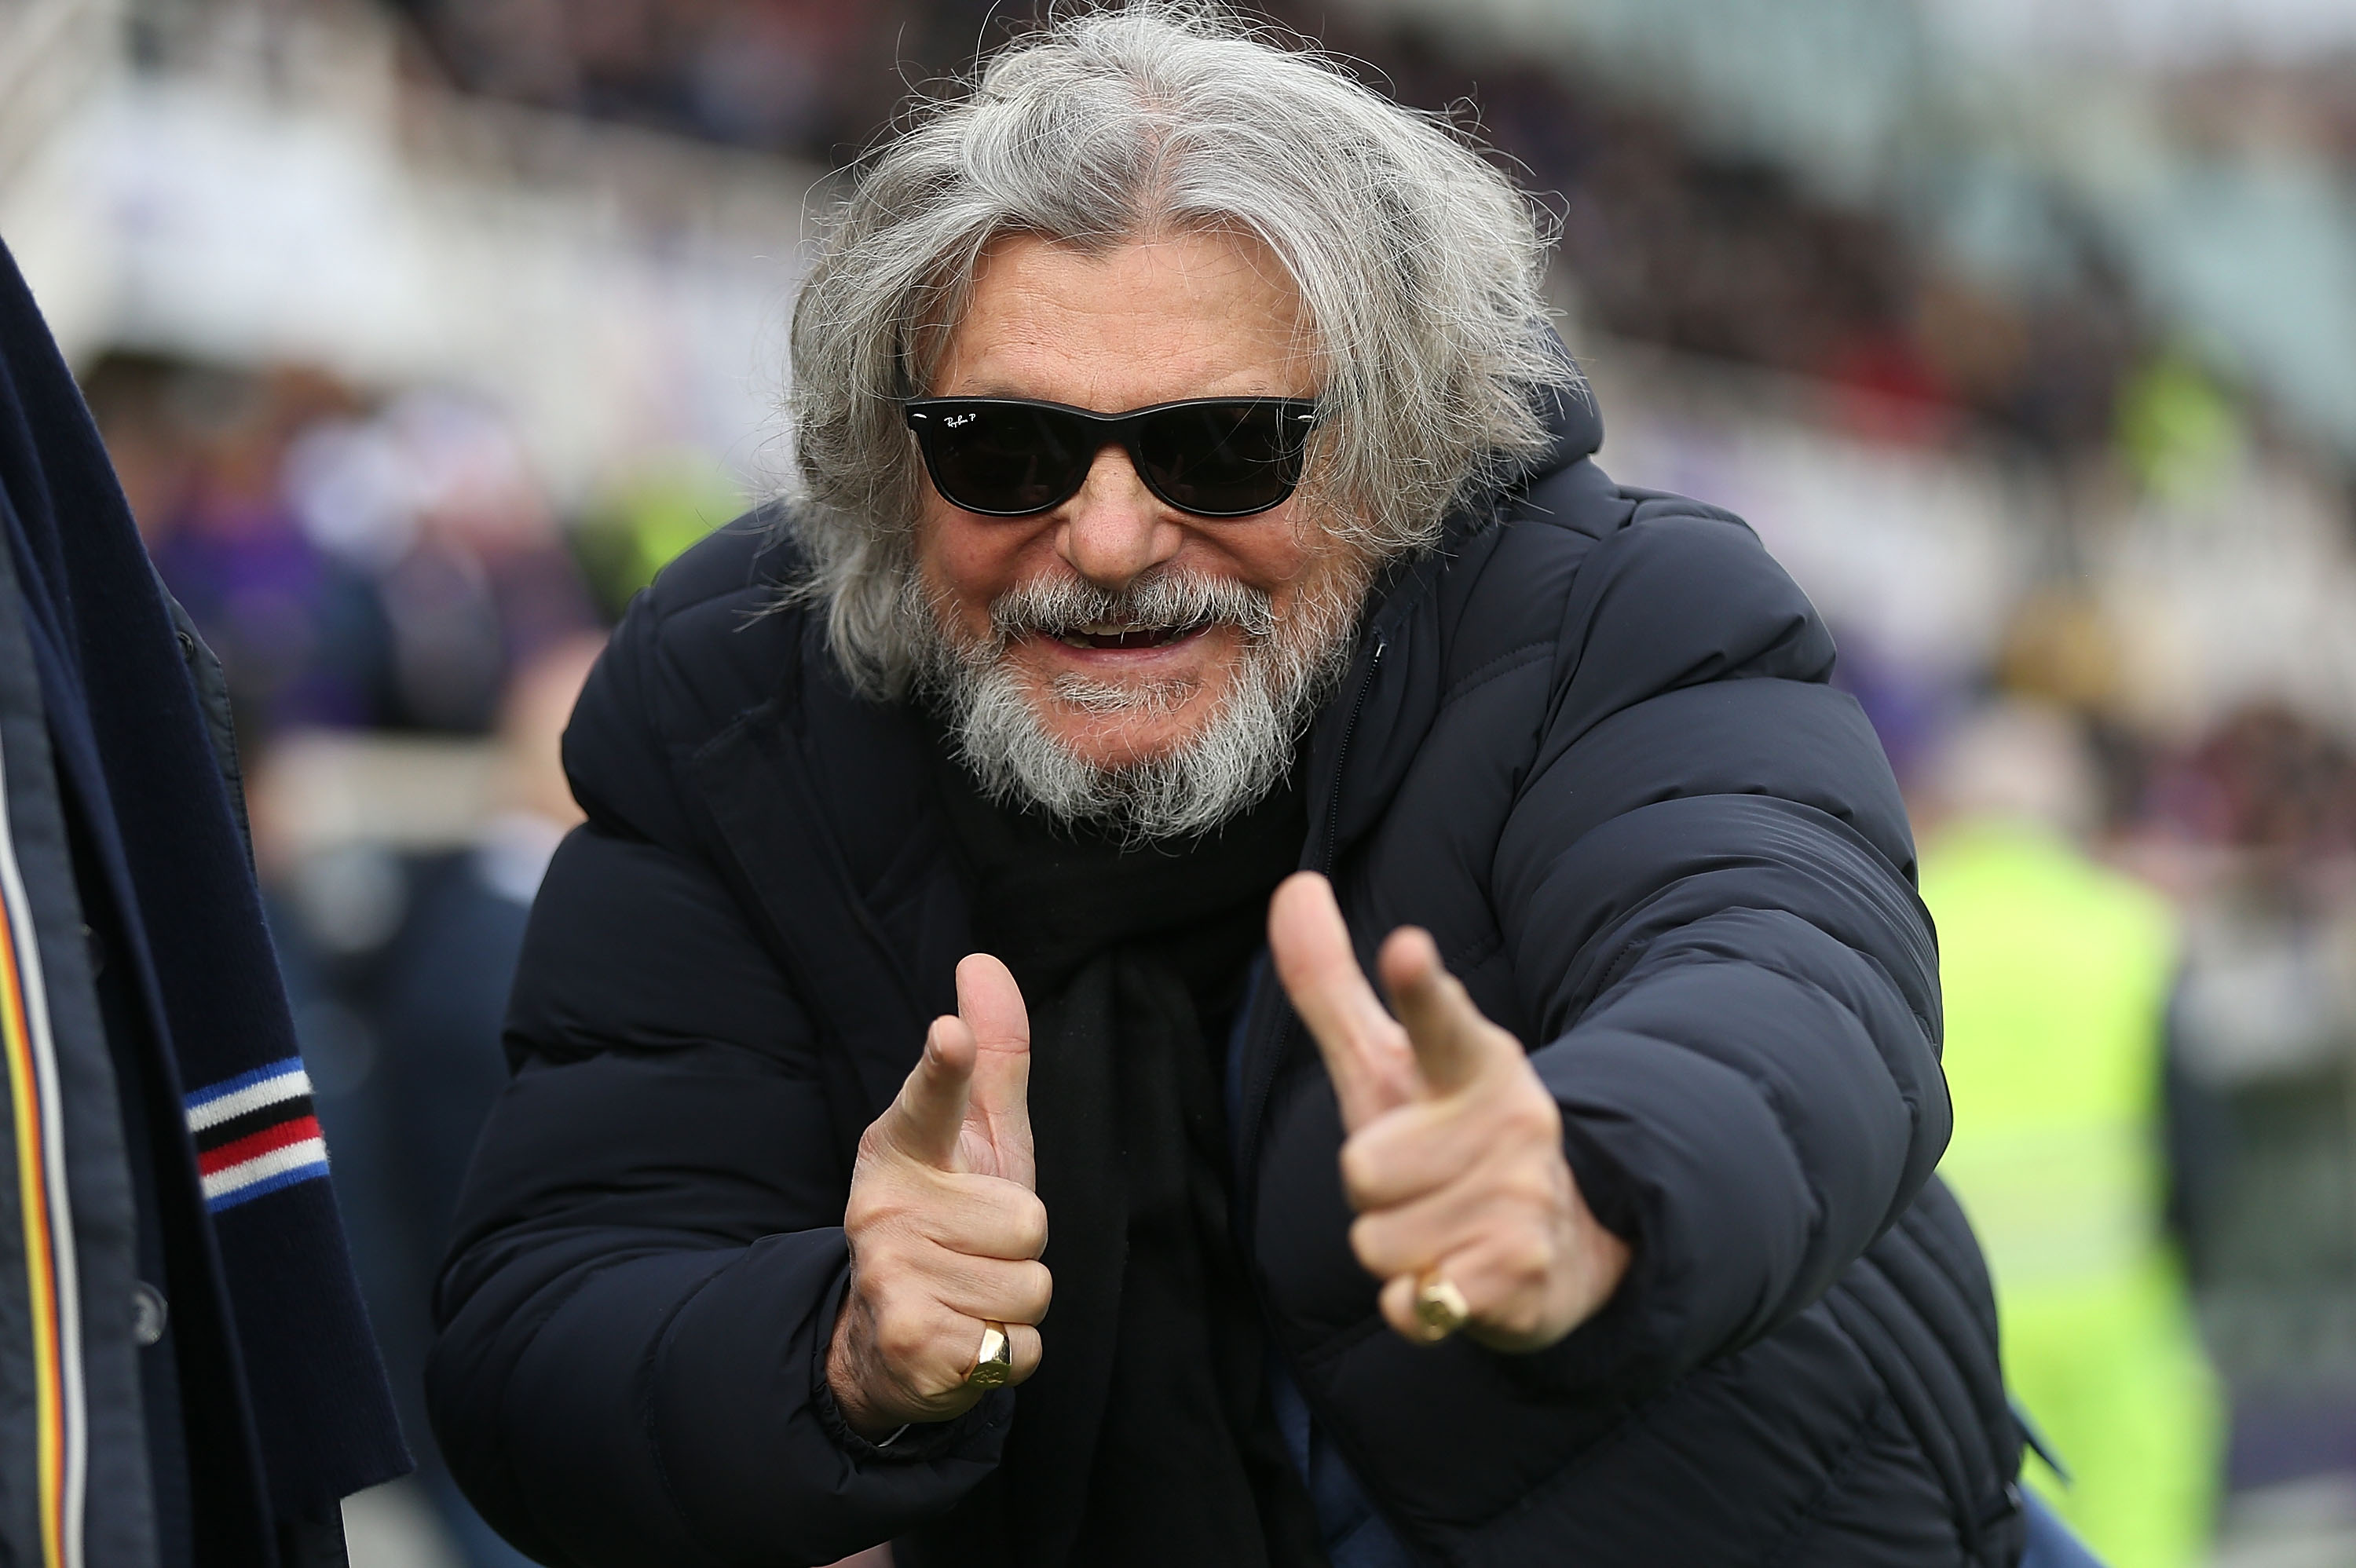 FLORENCE, ITALY - JANUARY 20: Massimo Ferrero president of UC Sampdoria during the Serie A match between ACF Fiorentina and UC Sampdoria at Stadio Artemio Franchi on January 20, 2019 in Florence, Italy.  (Photo by Gabriele Maltinti/Getty Images)